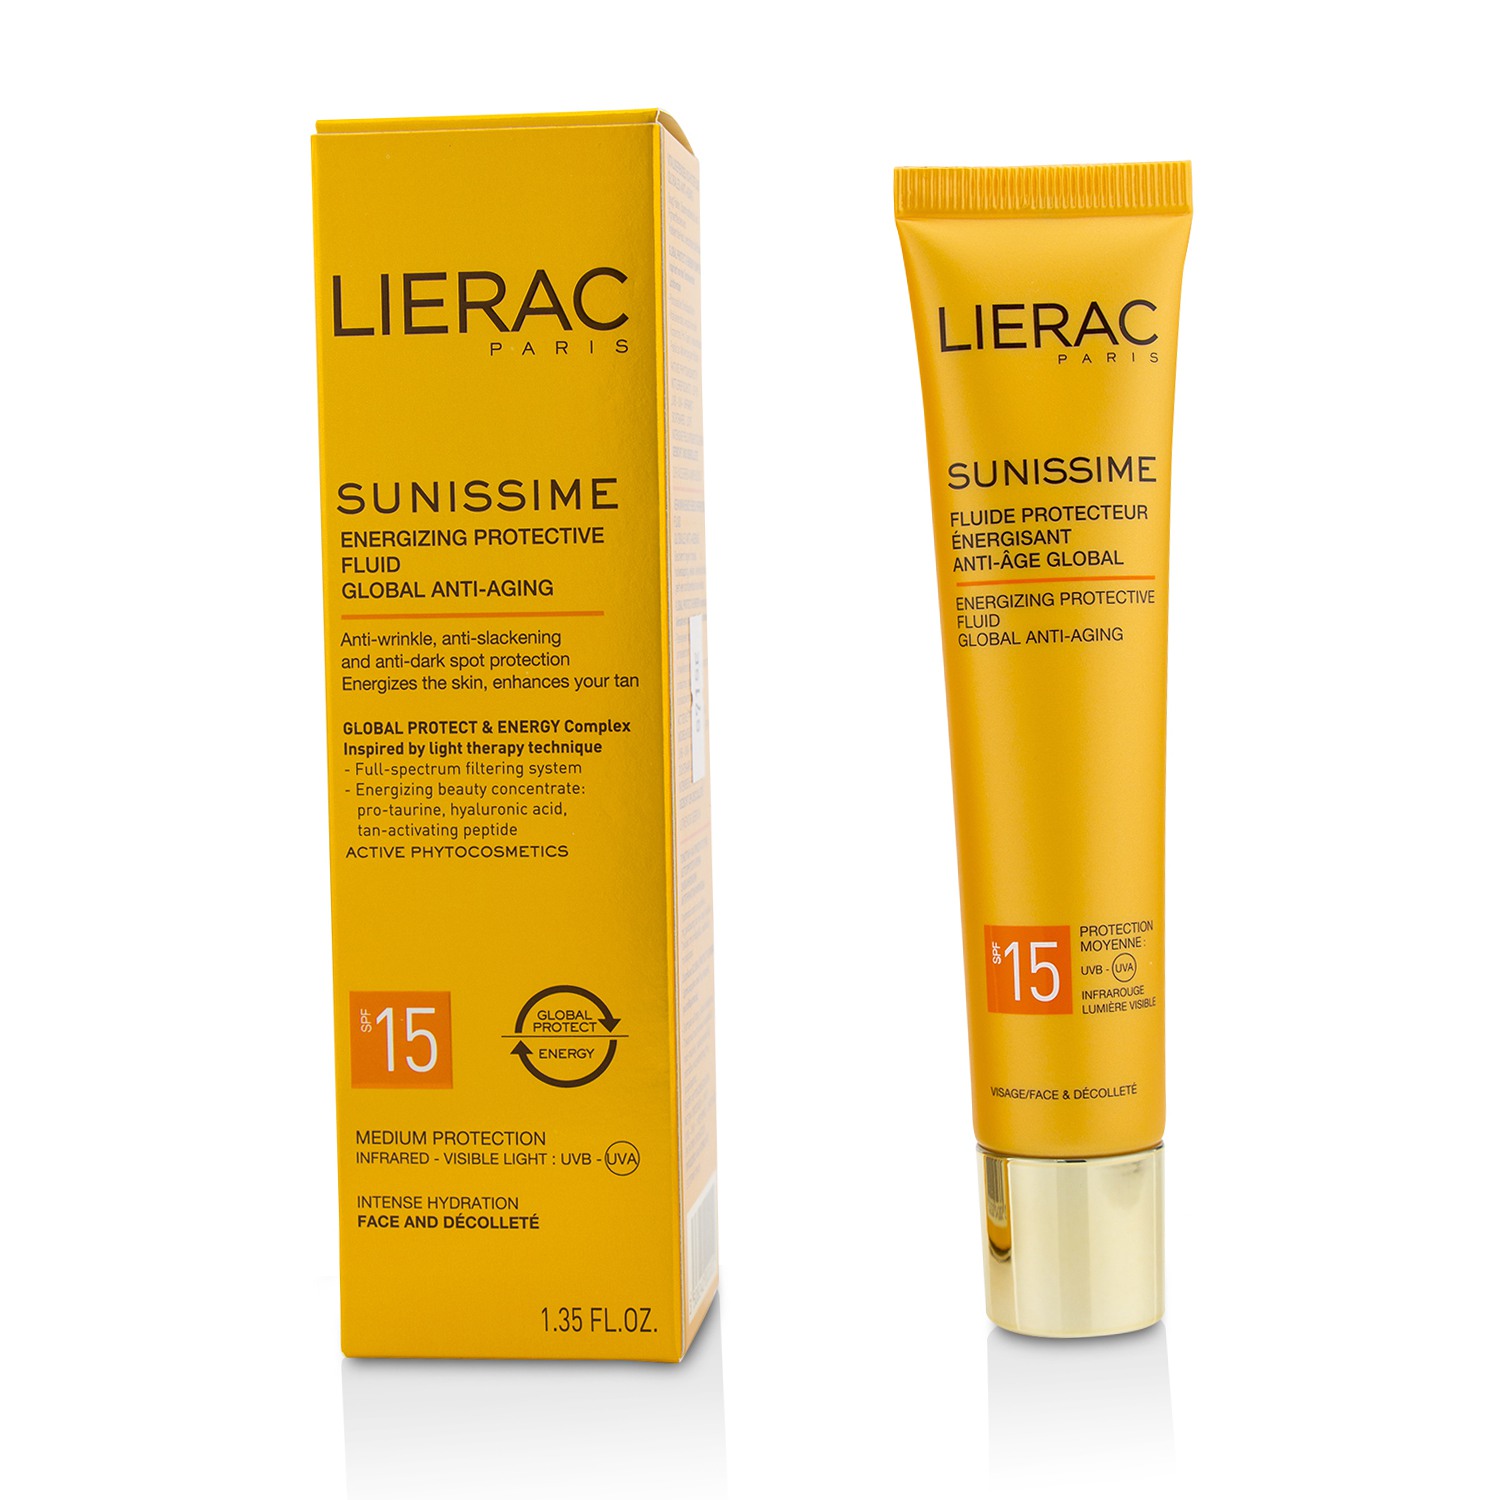 Sunissime Global Anti-Aging Energizing Protective Fluid SPF15 For Face & Decollete Lierac Image